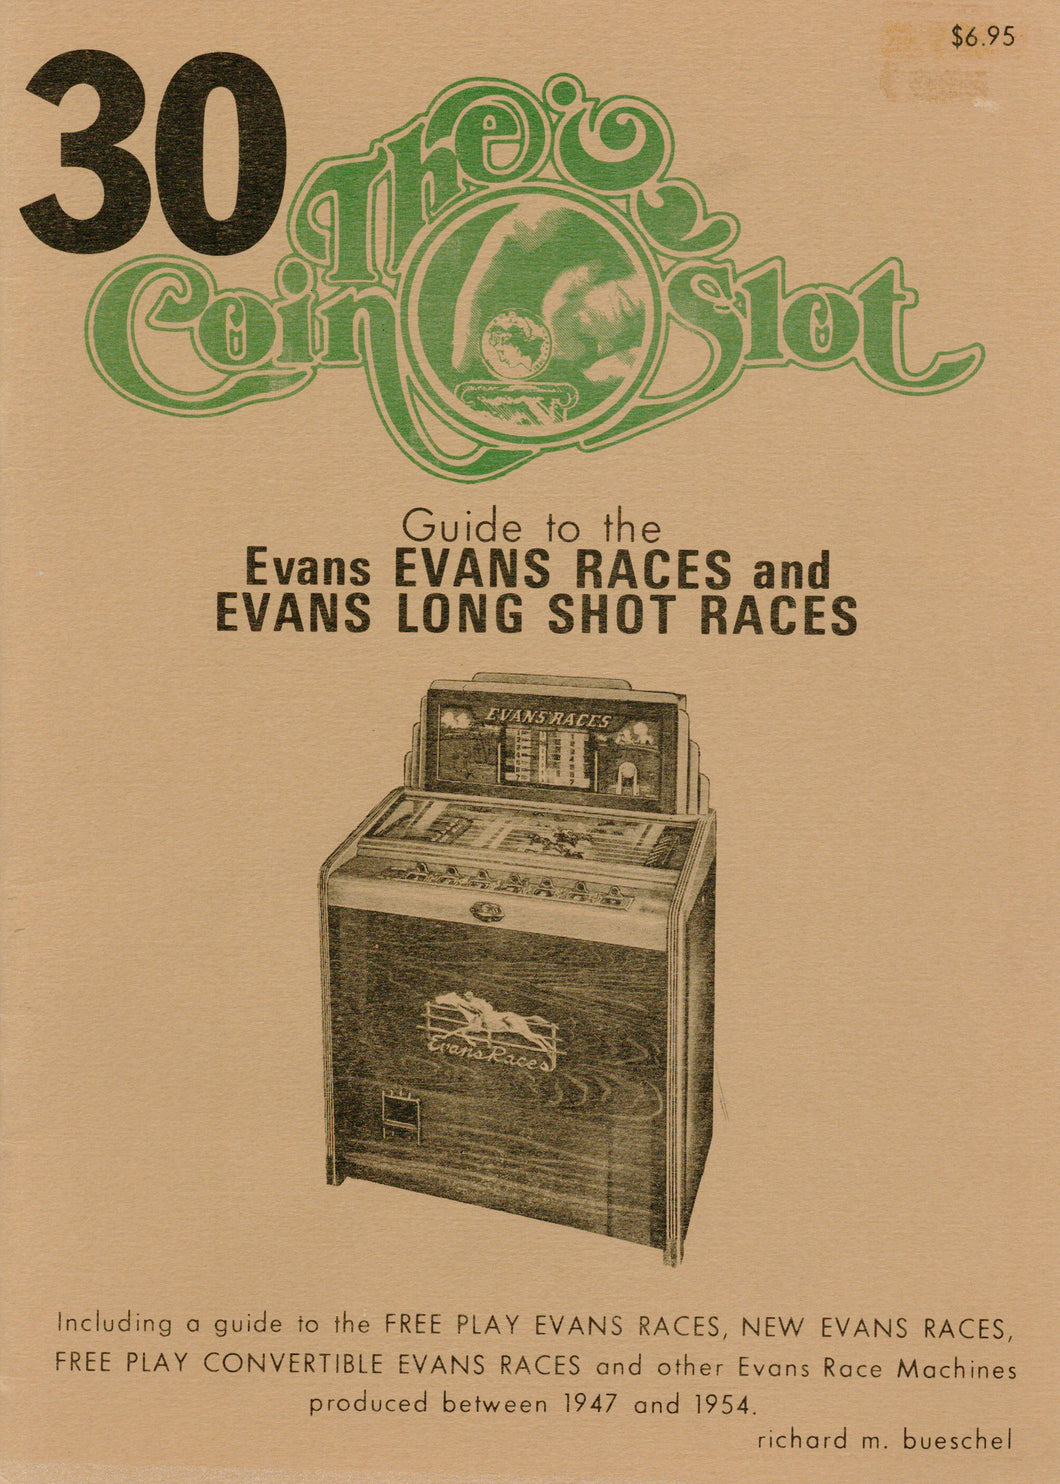 Coin Slot #30. Guide to the Evans Races and Evans Long Shot Races